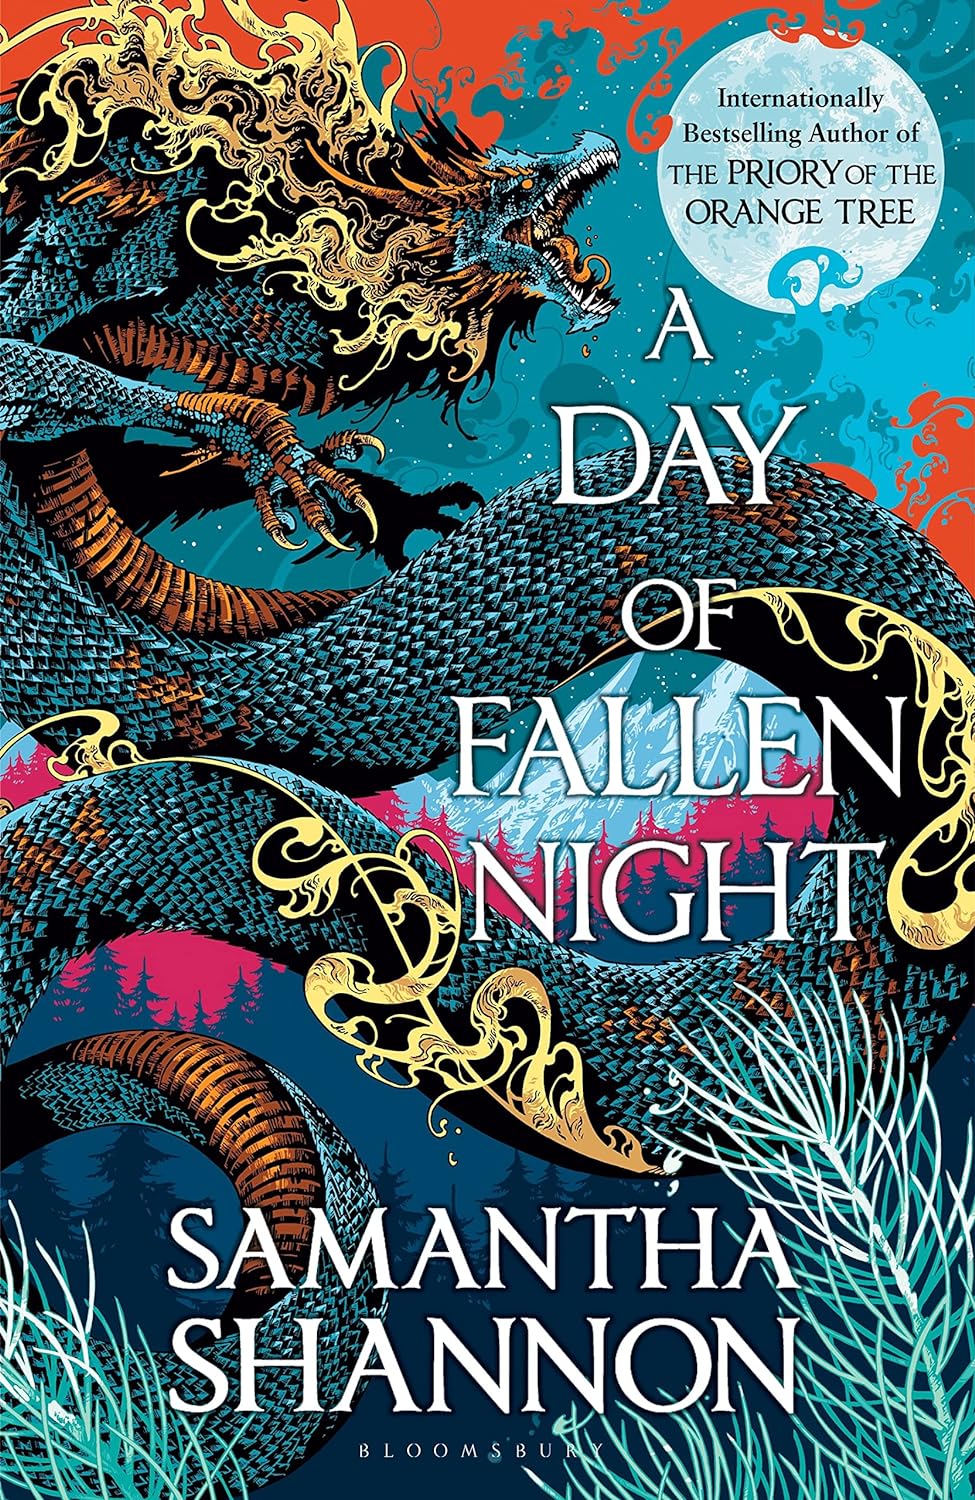 Cover of "A Day of Fallen Night" by Samantha Shannon